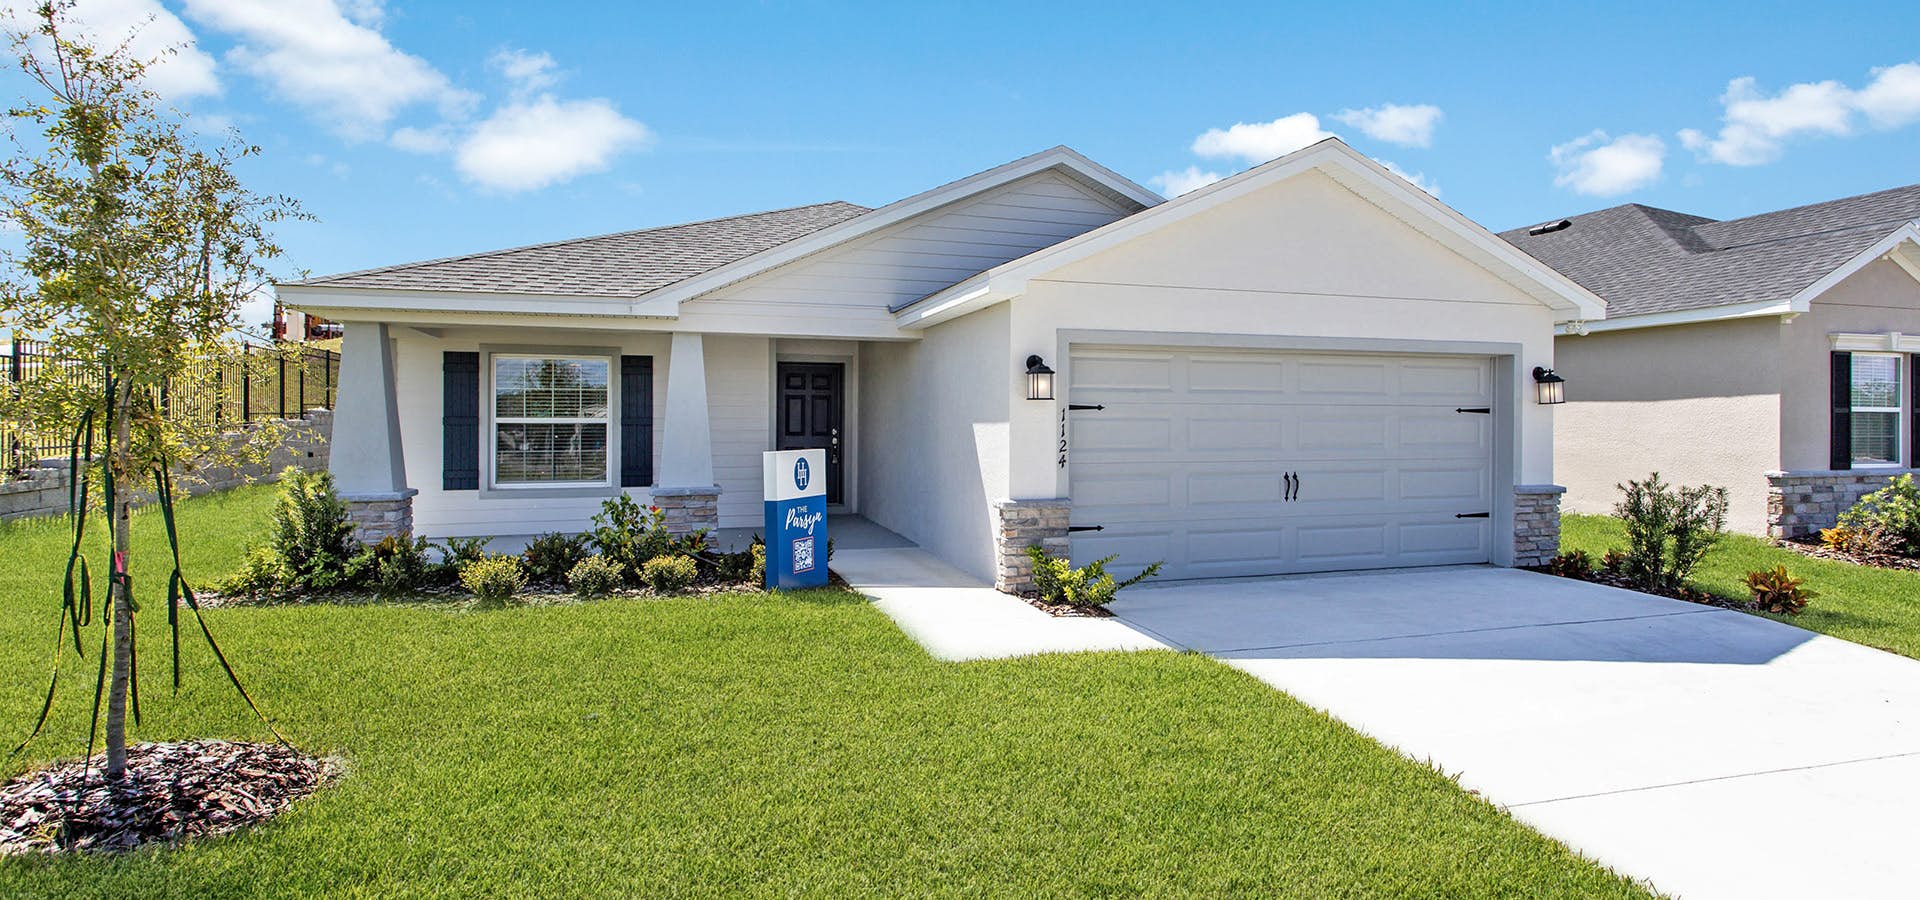 Exterior of the Parsyn by Highland Homes in Davenport, FL